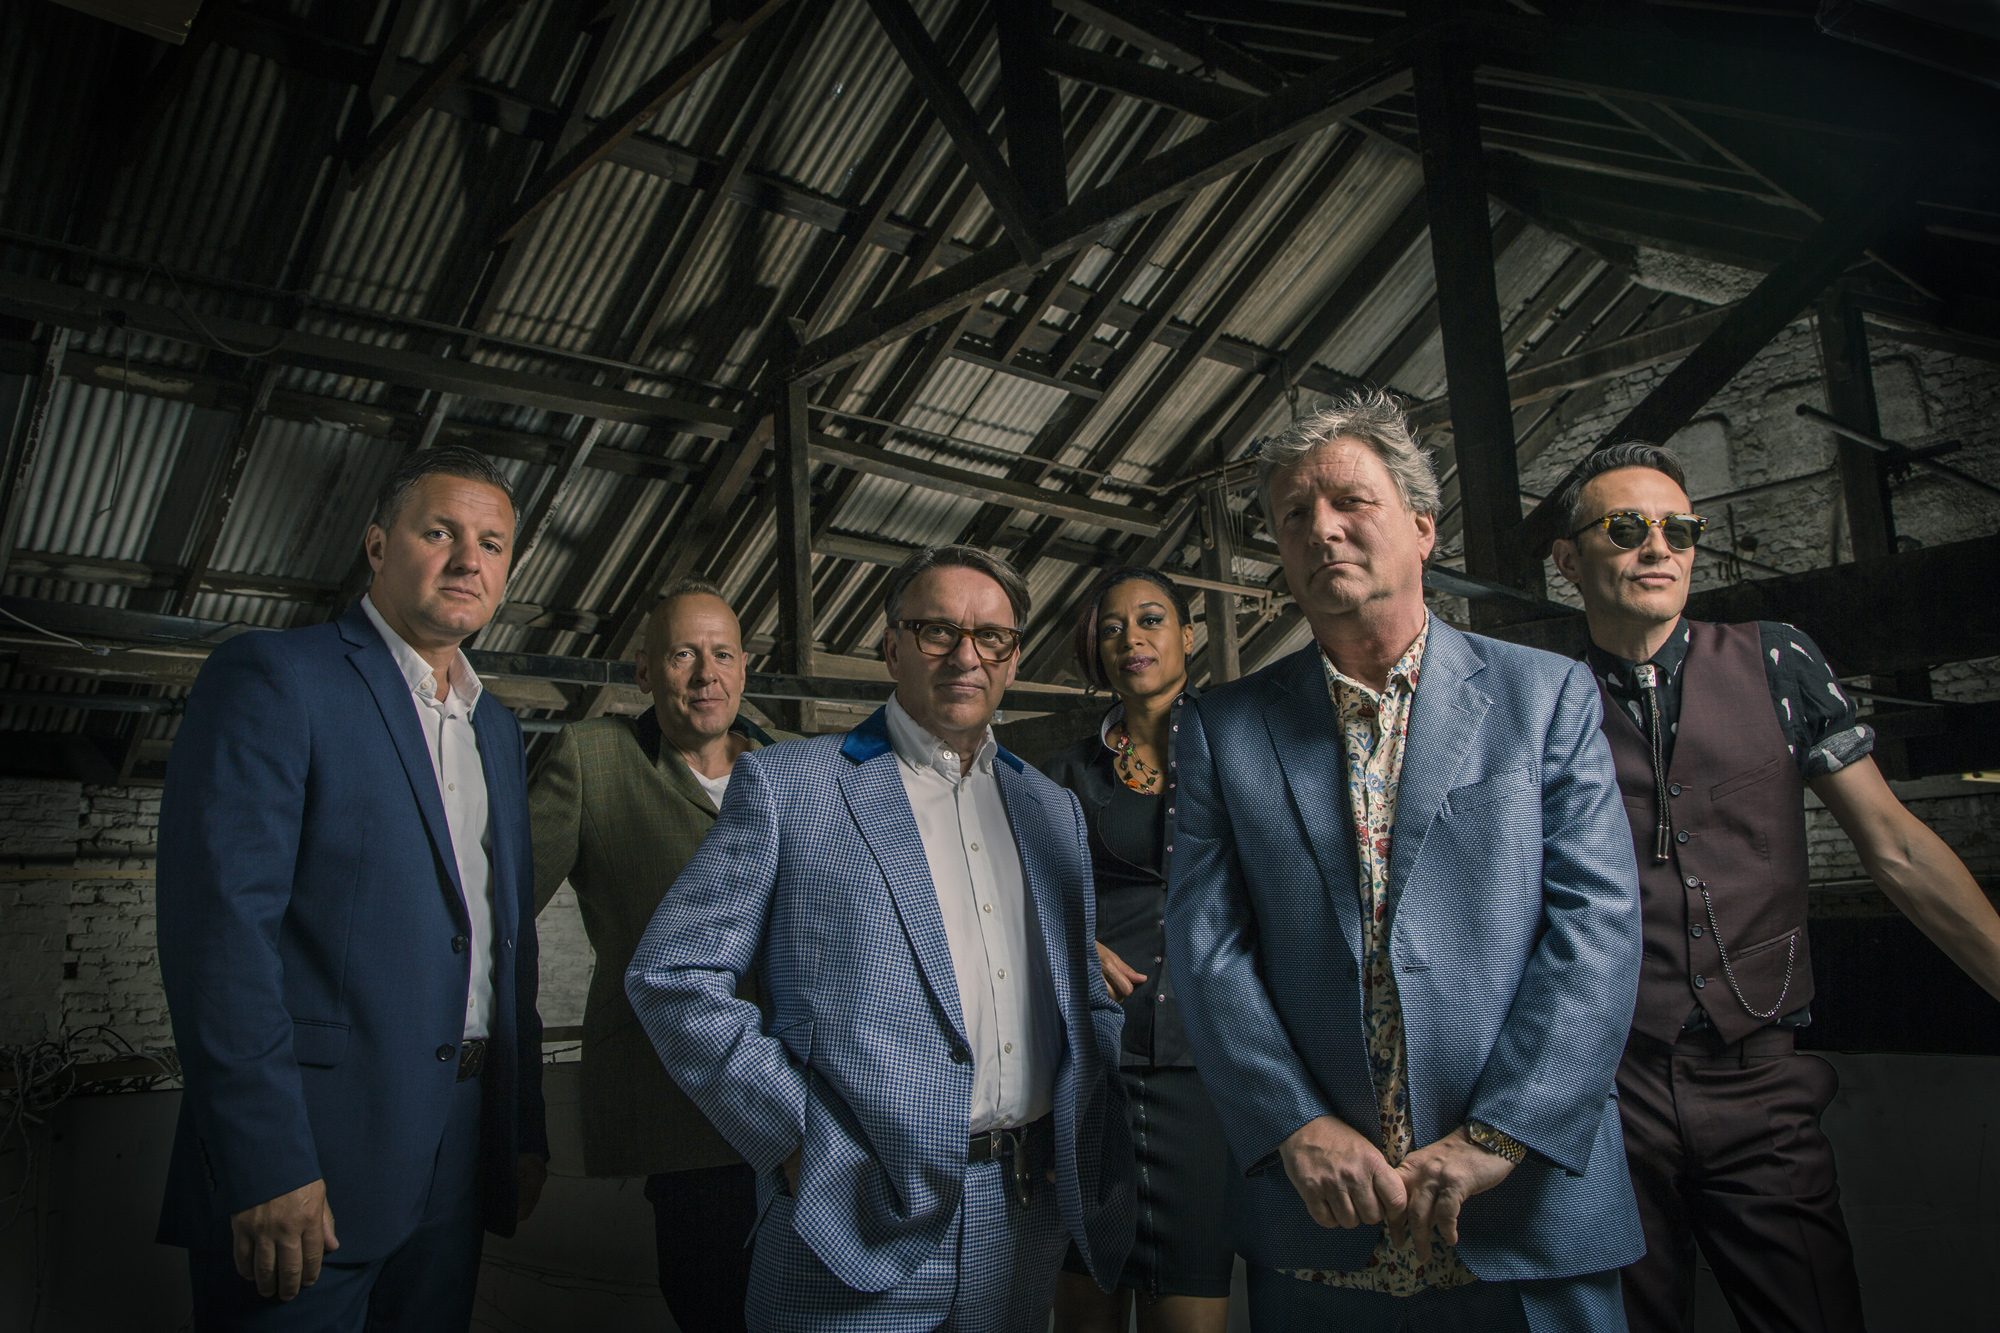 British new wave band Squeeze plays with Marshall Crenshaw at Kirby